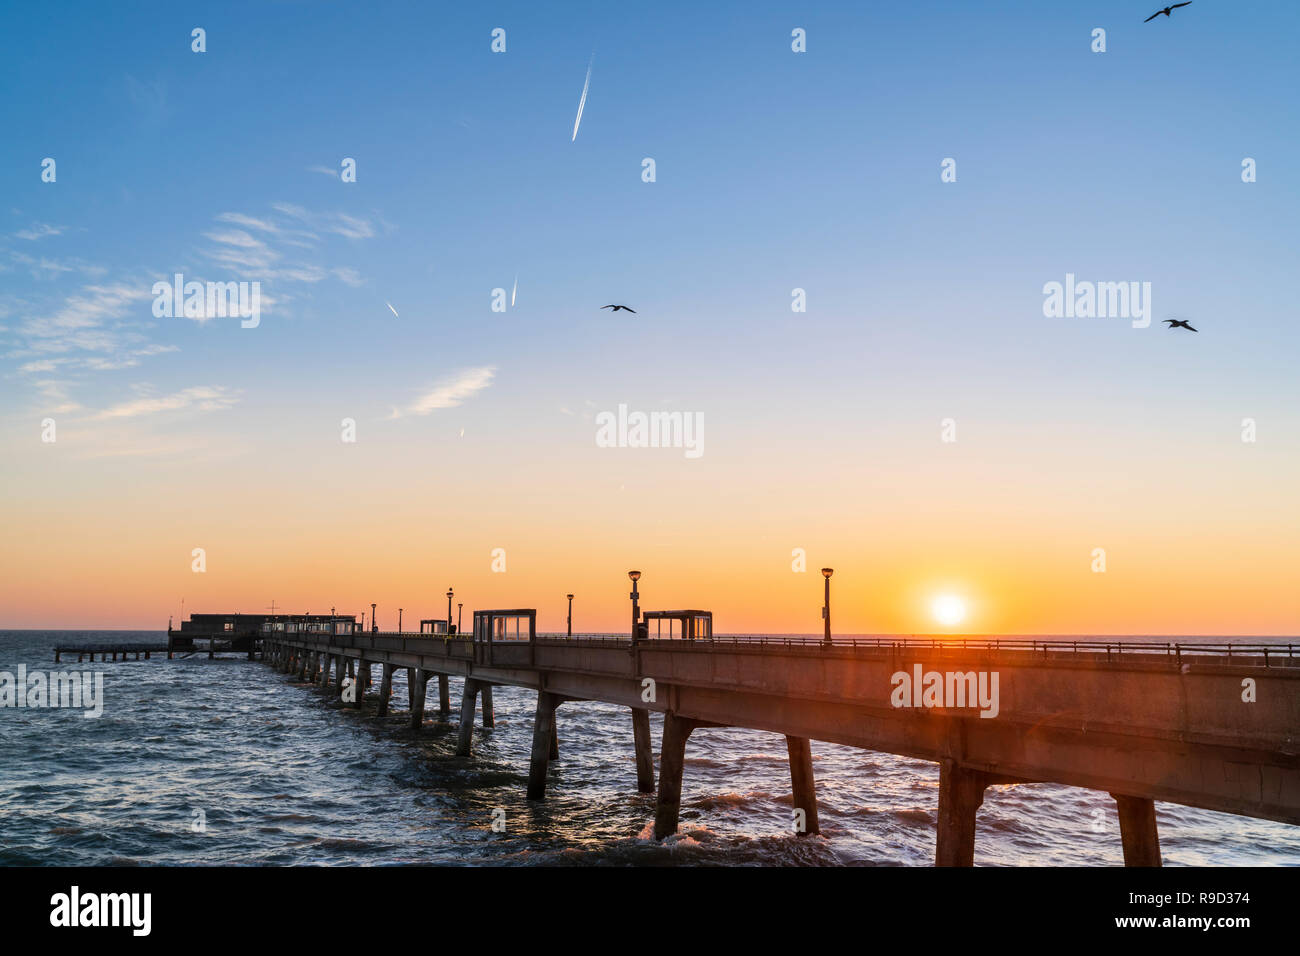 Sunrise in clear blue and yellow sky over the English Channel and Deal pier on the kent Coast. Choppy, rough sea crashing on to shingle beach. Stock Photo